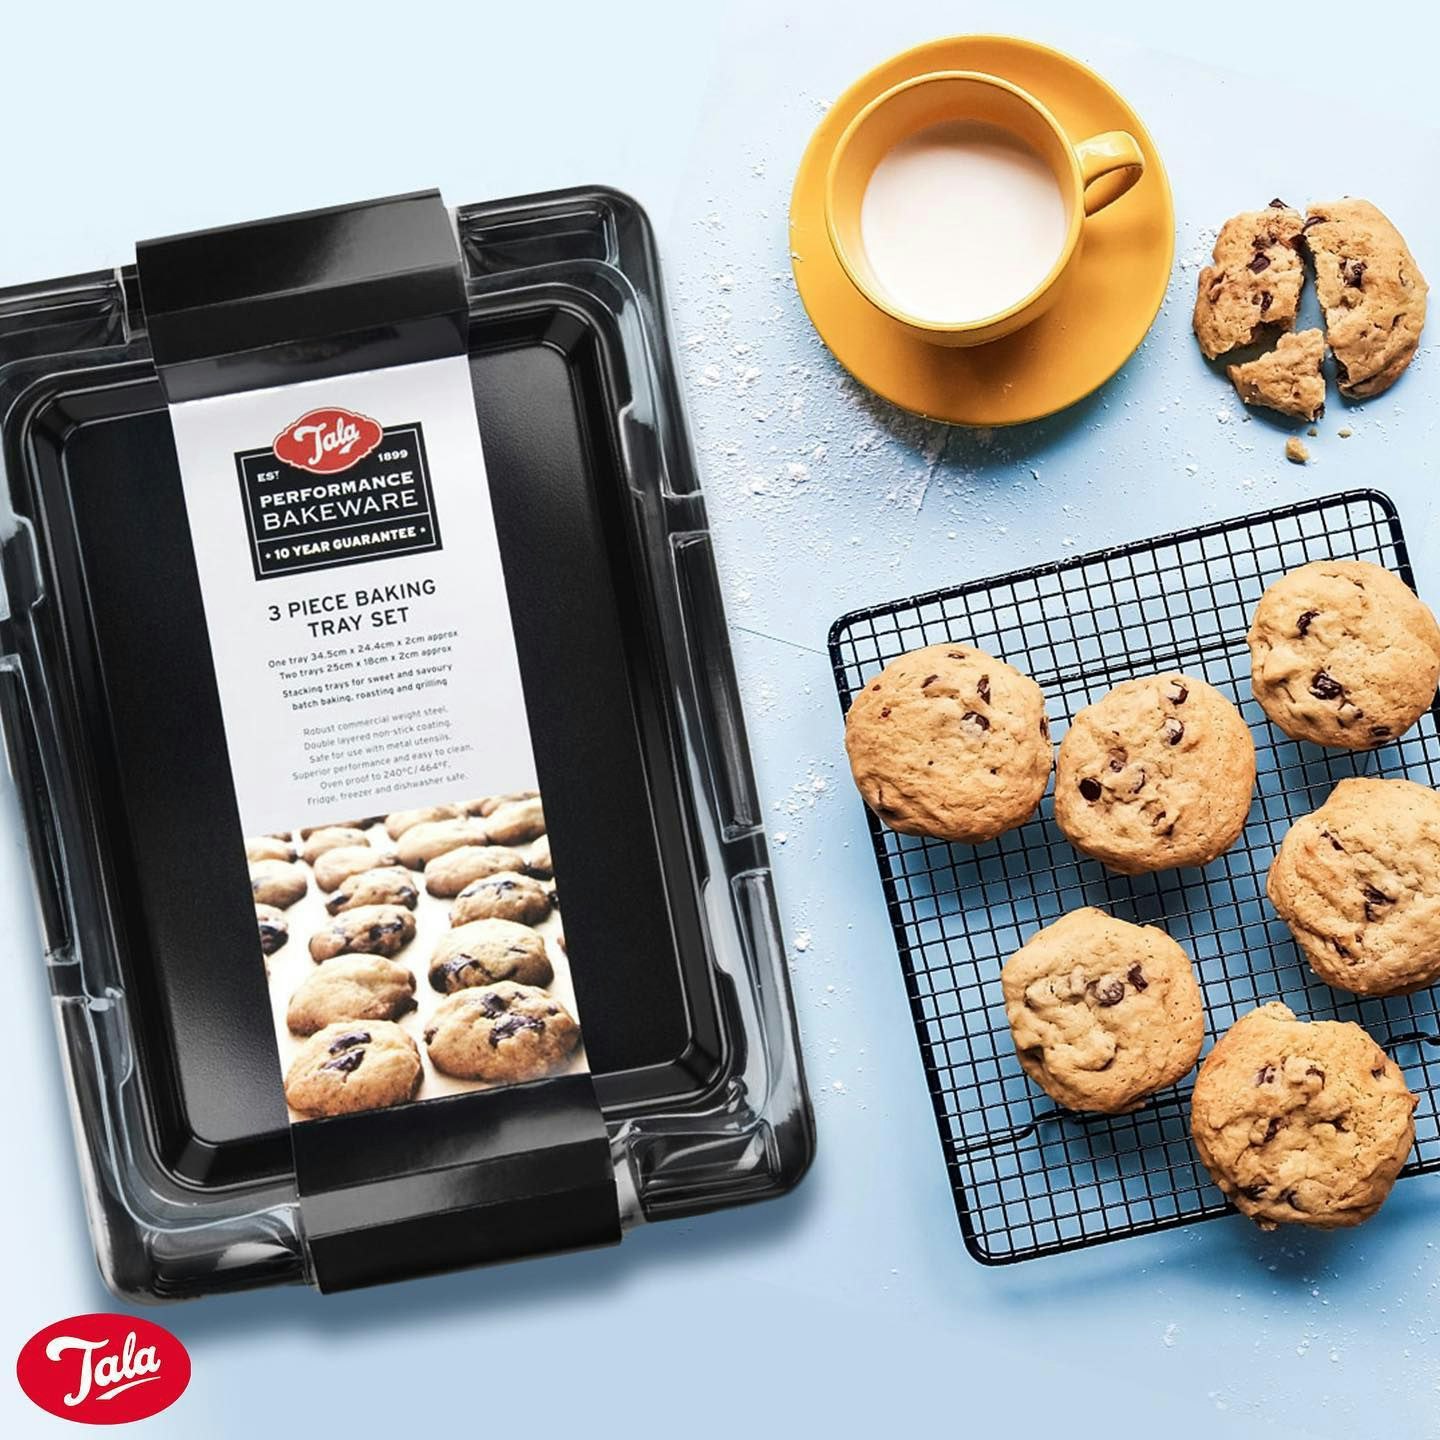 baking tray from Tala with cookies and a mug of milk